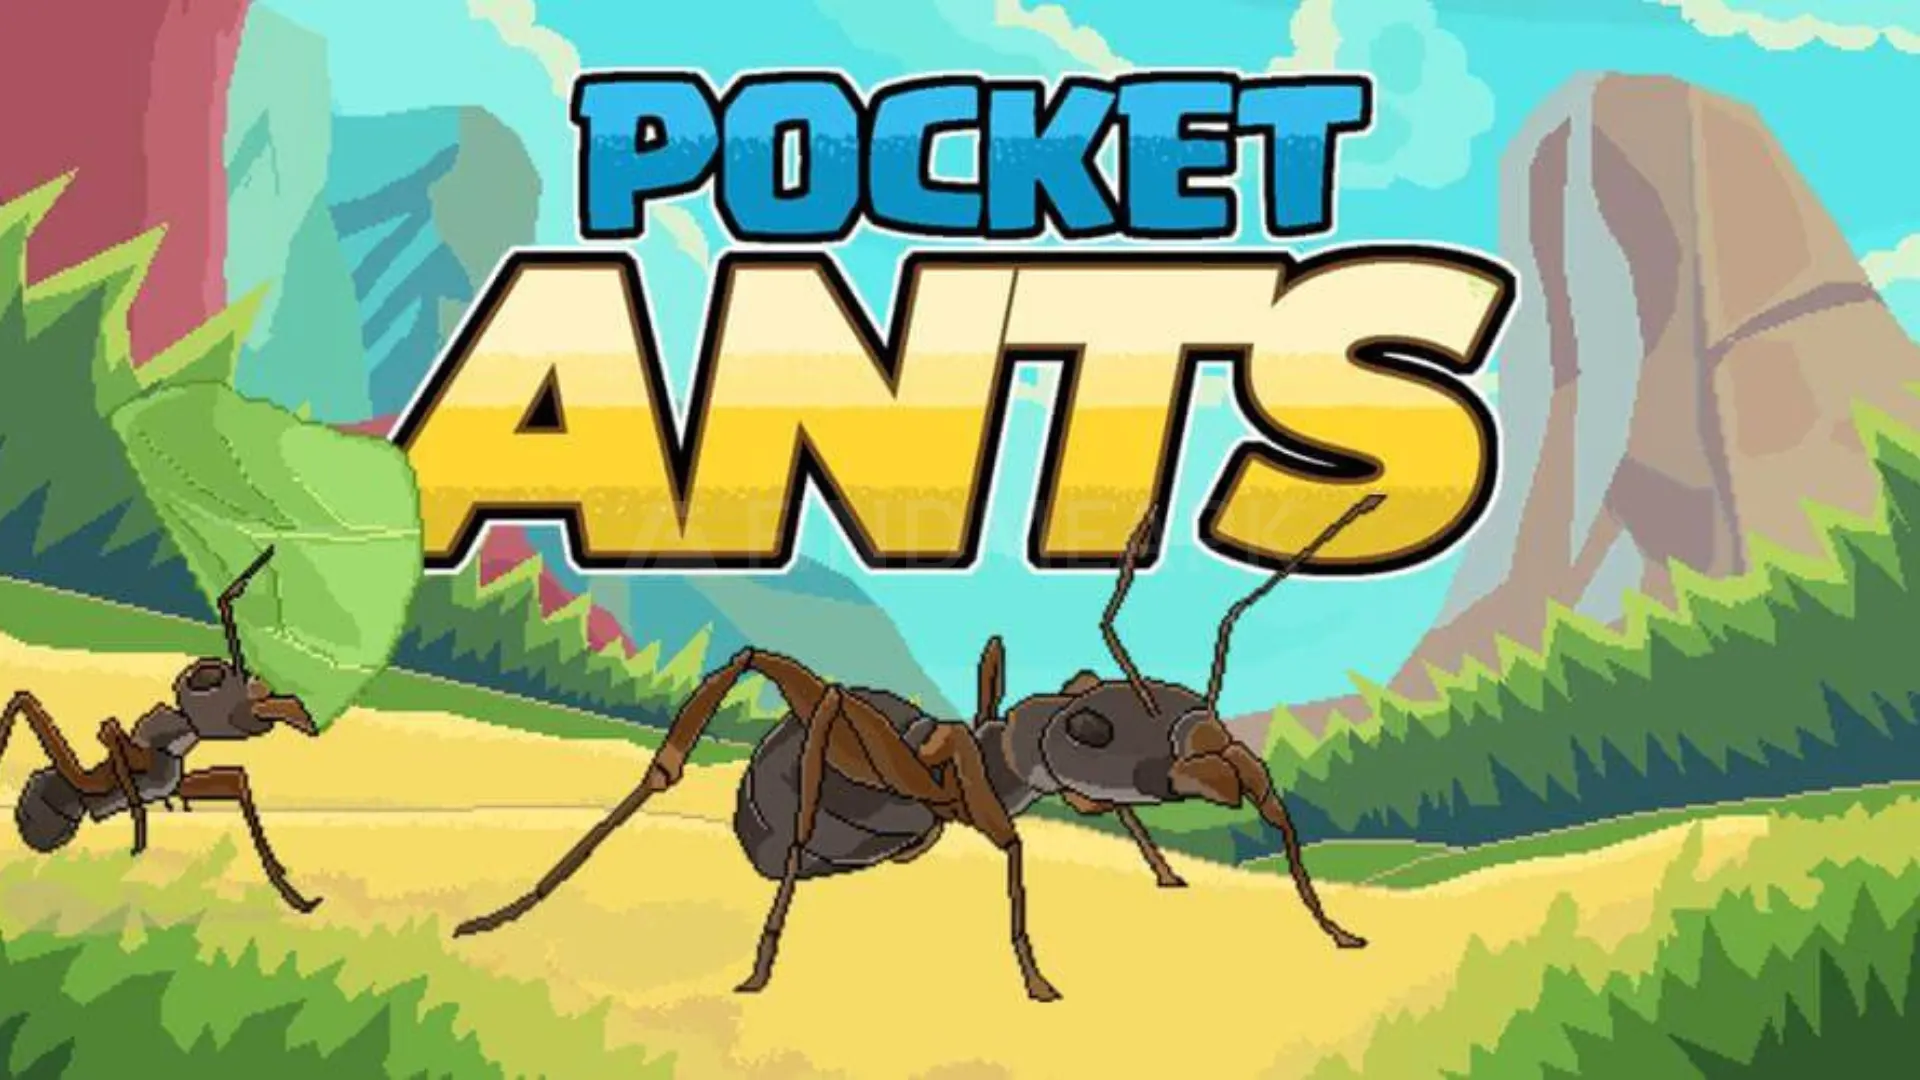 Pocket Ants feature image